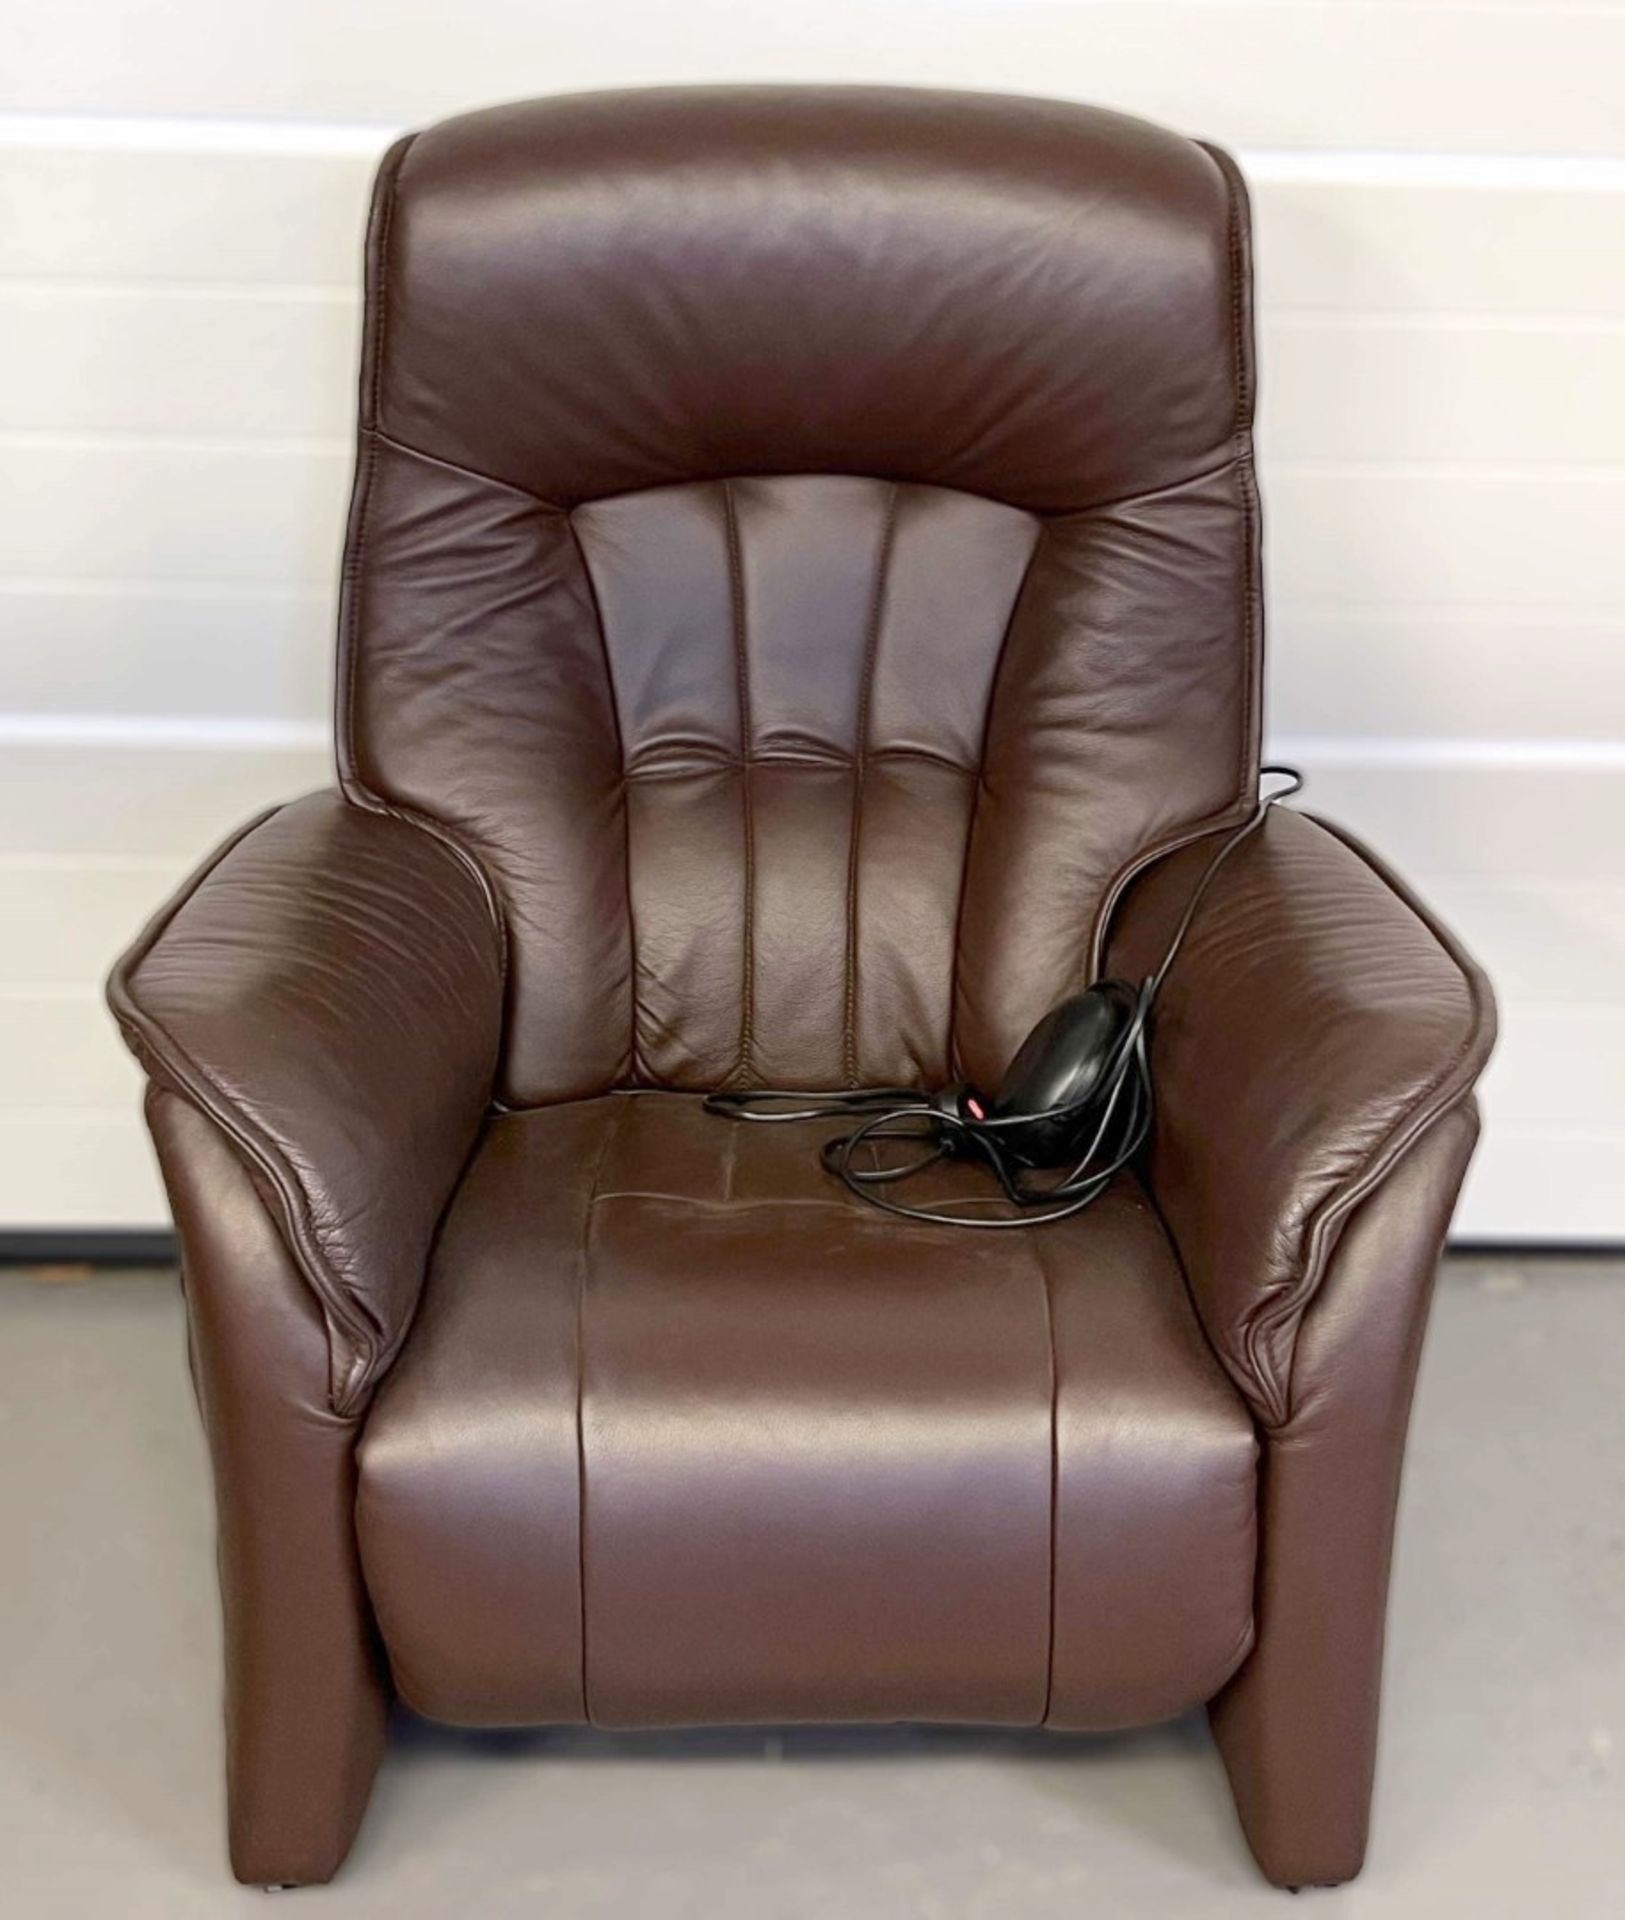 1 x HIMOLLA Premium Dual-Motor Reclining Chair Upholstered In Brown Leather - NO VAT ON THE HAMMER -